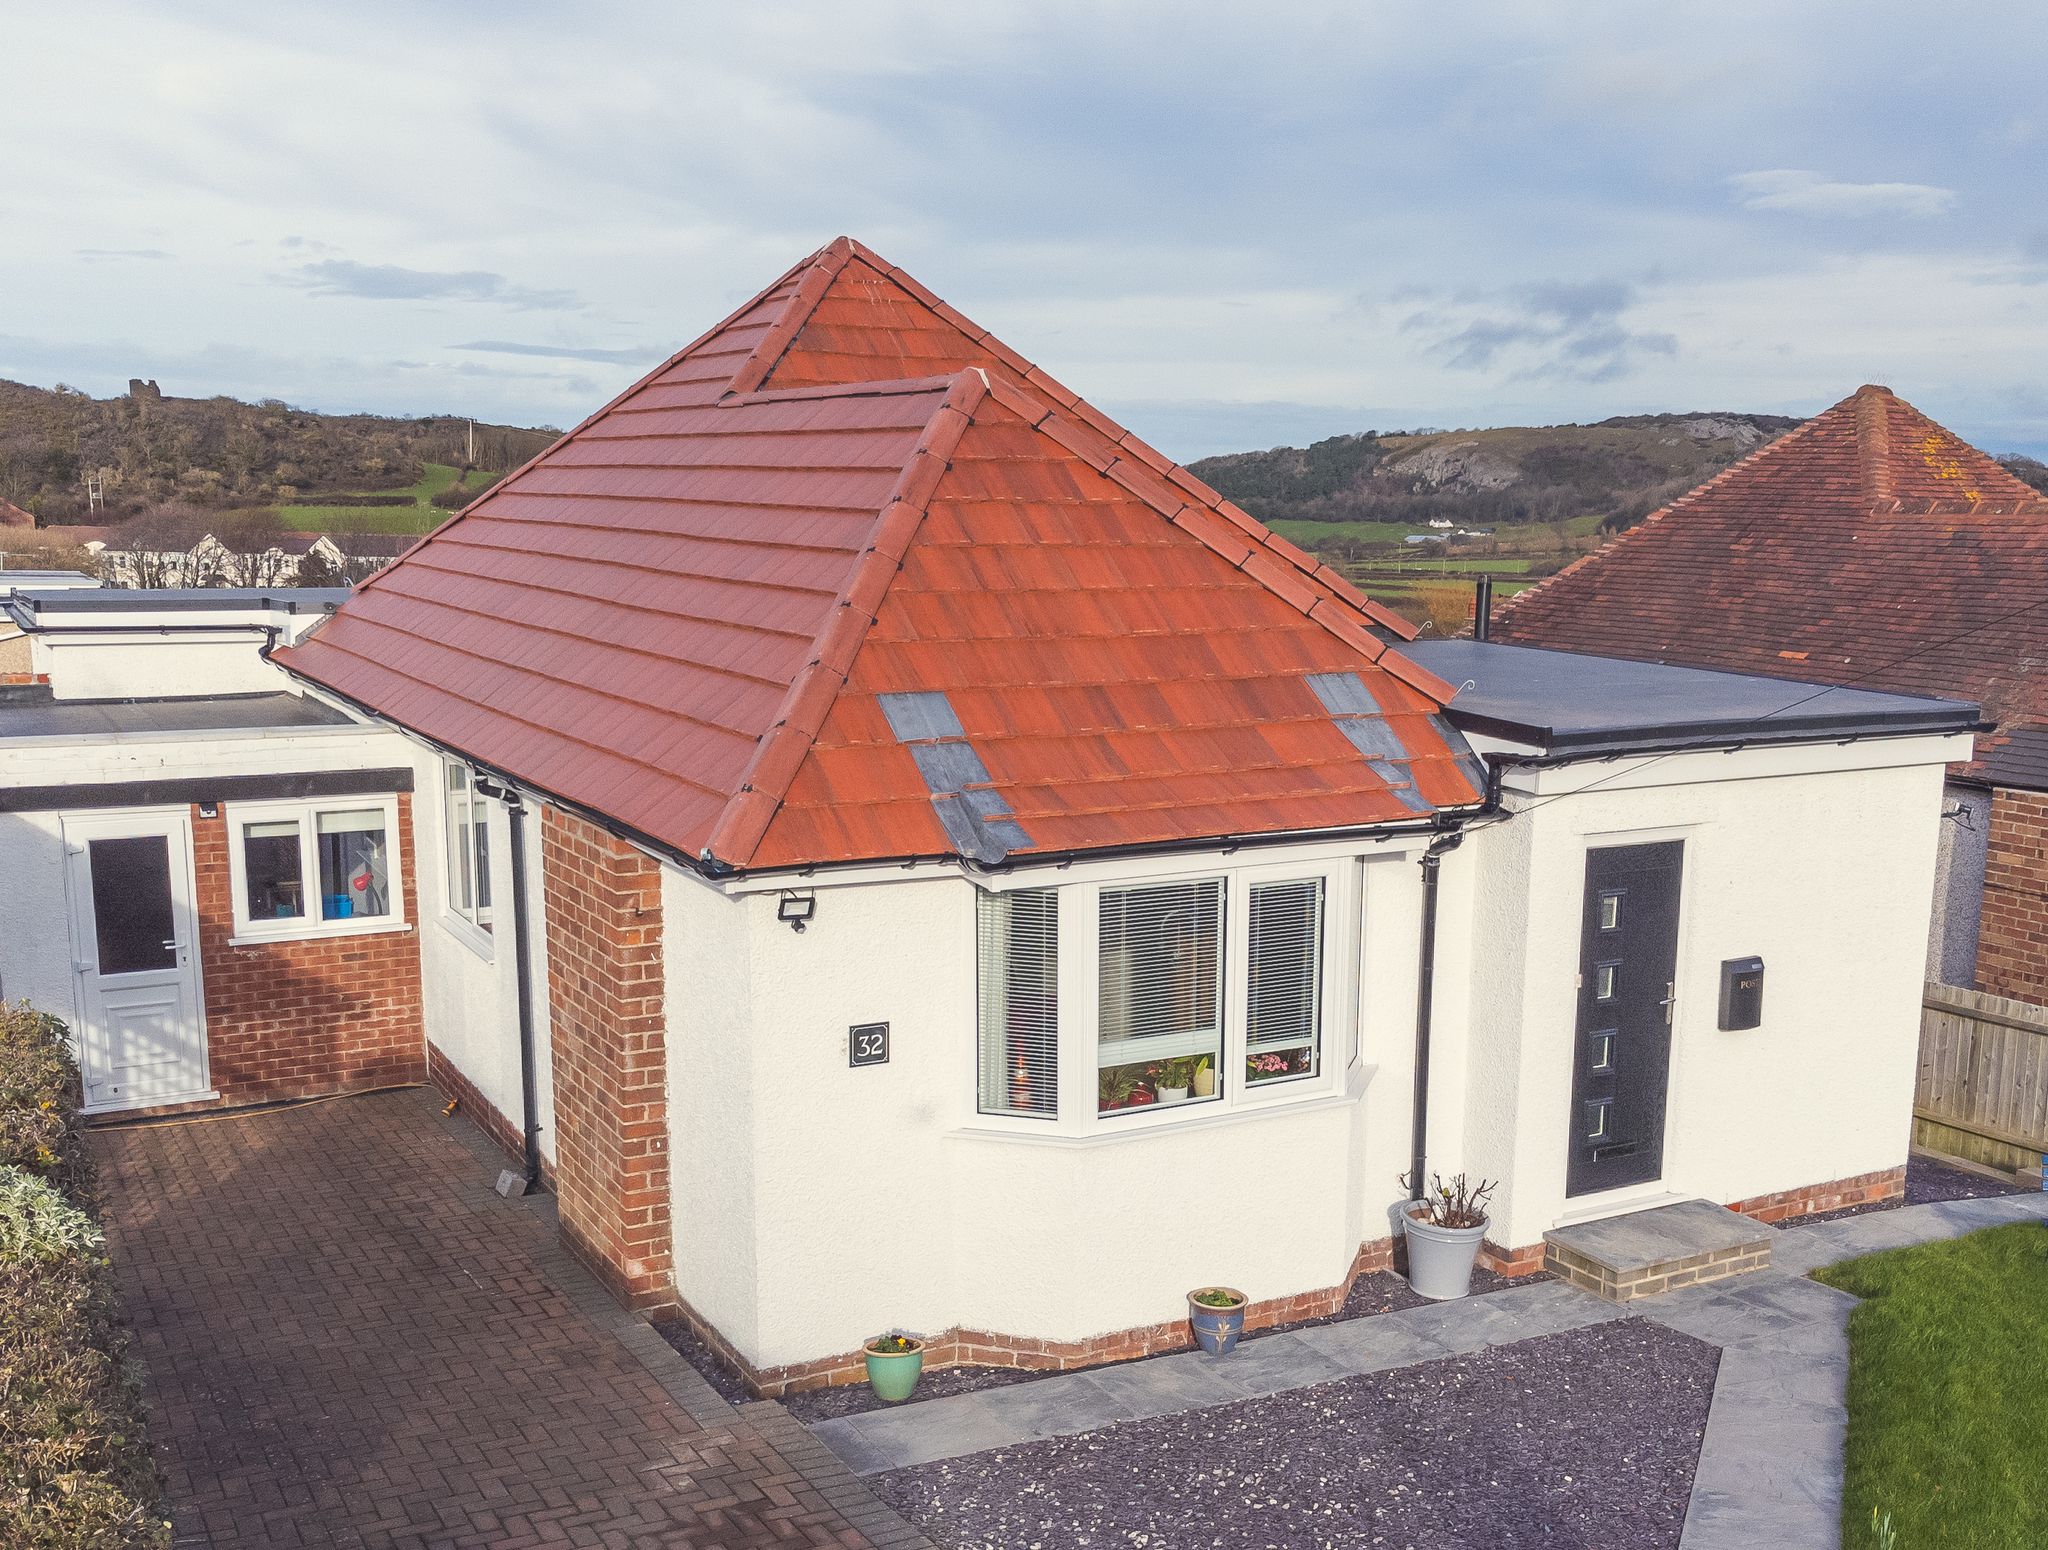 Tile Roof Contractors Bryneglwys, LL21 - DD Roofing